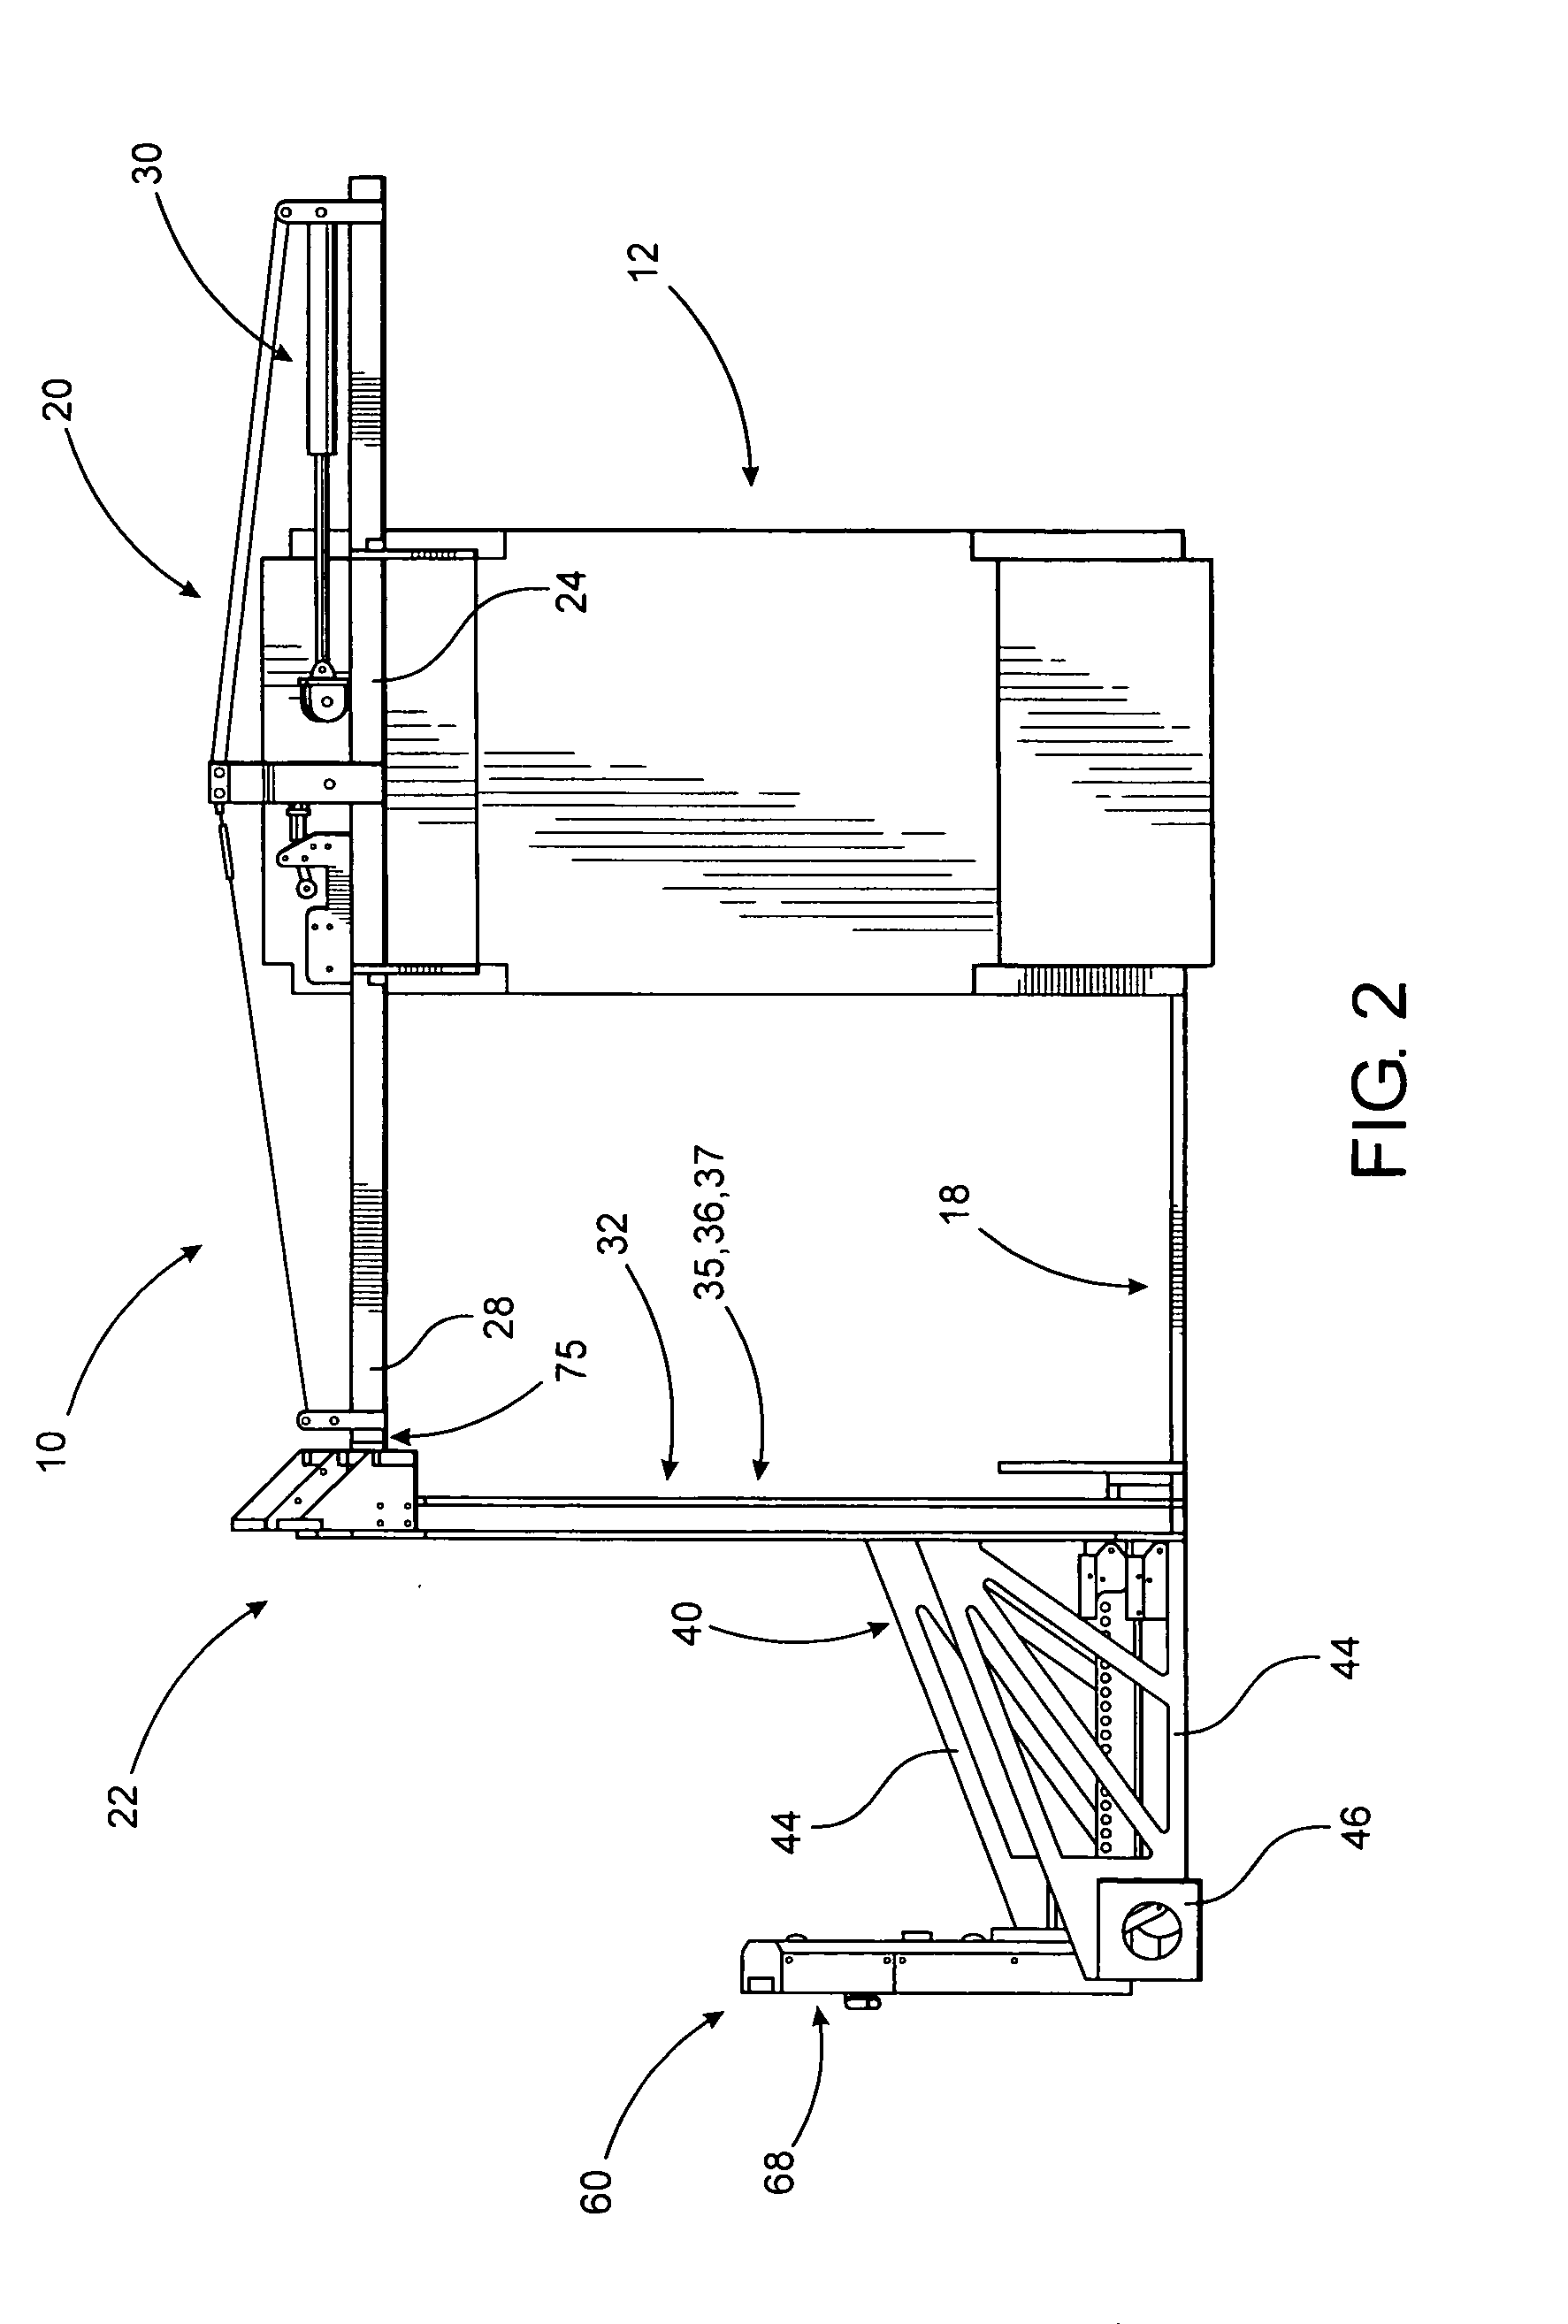 Cargo transfer assembly associated with a passenger boarding bridge